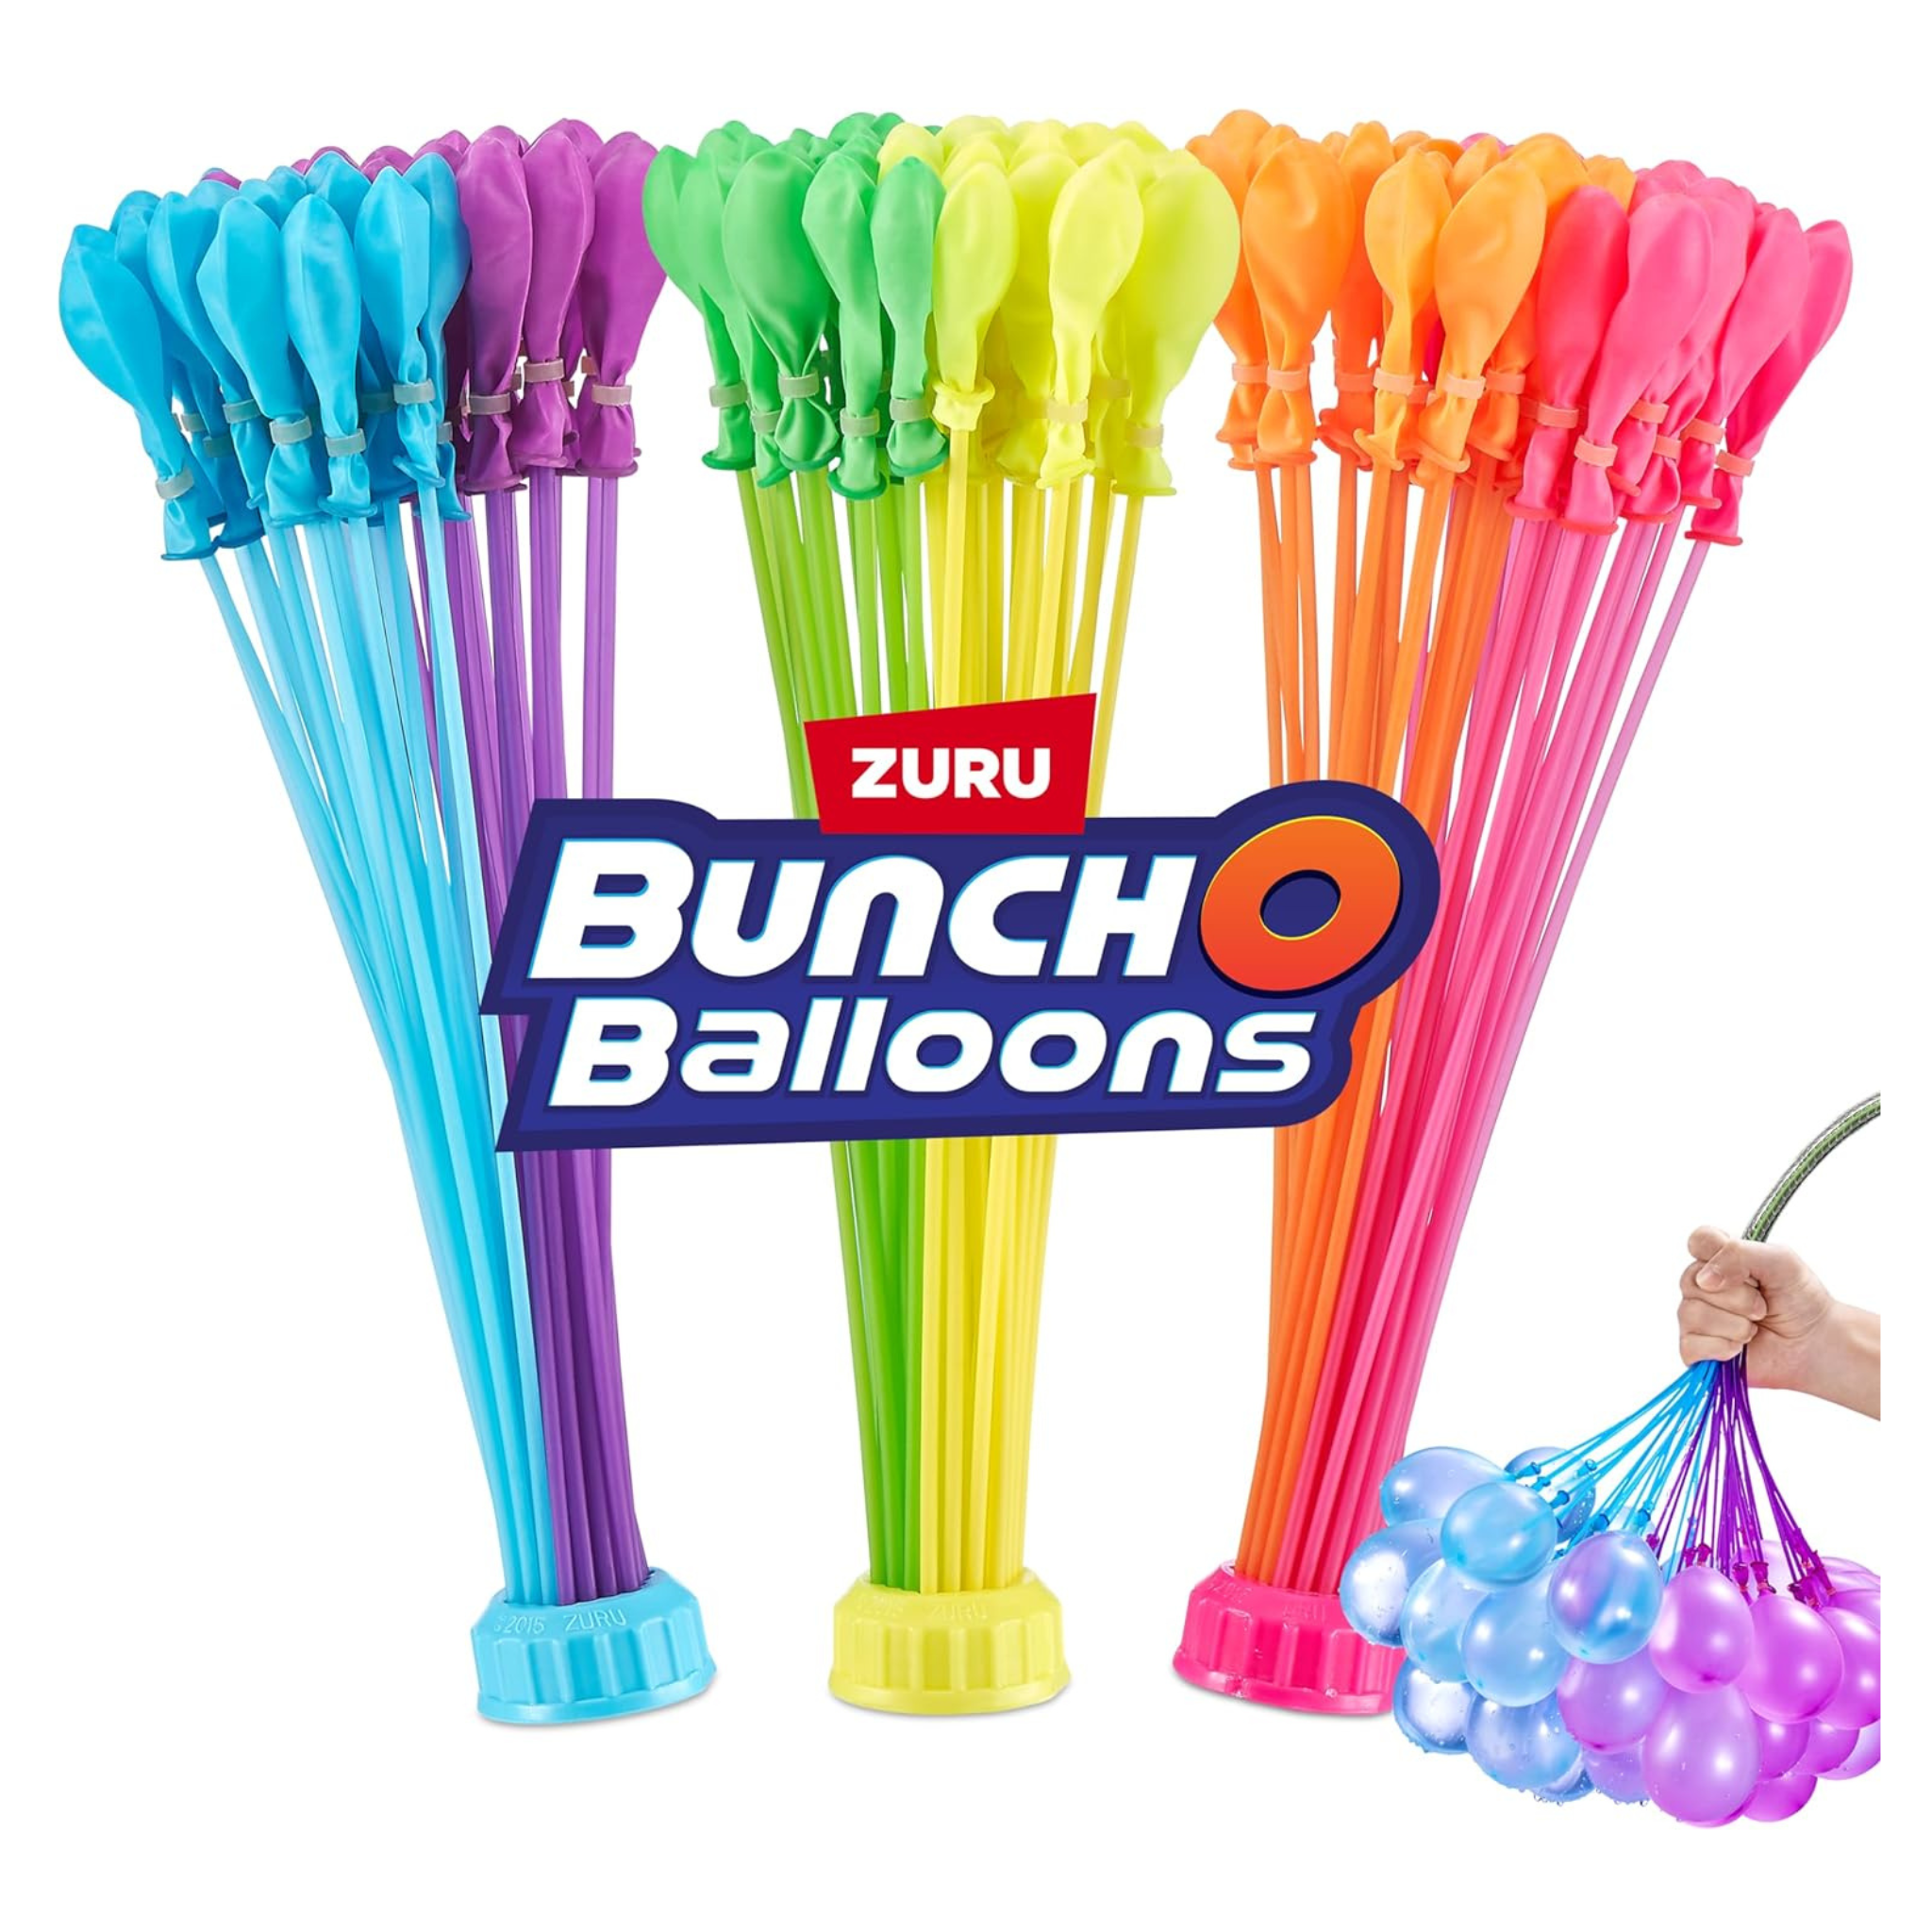 3 Pack Of Bunch O Balloons Tropical Party With 100+ Rapid-Filling Self-Sealing Water Balloons